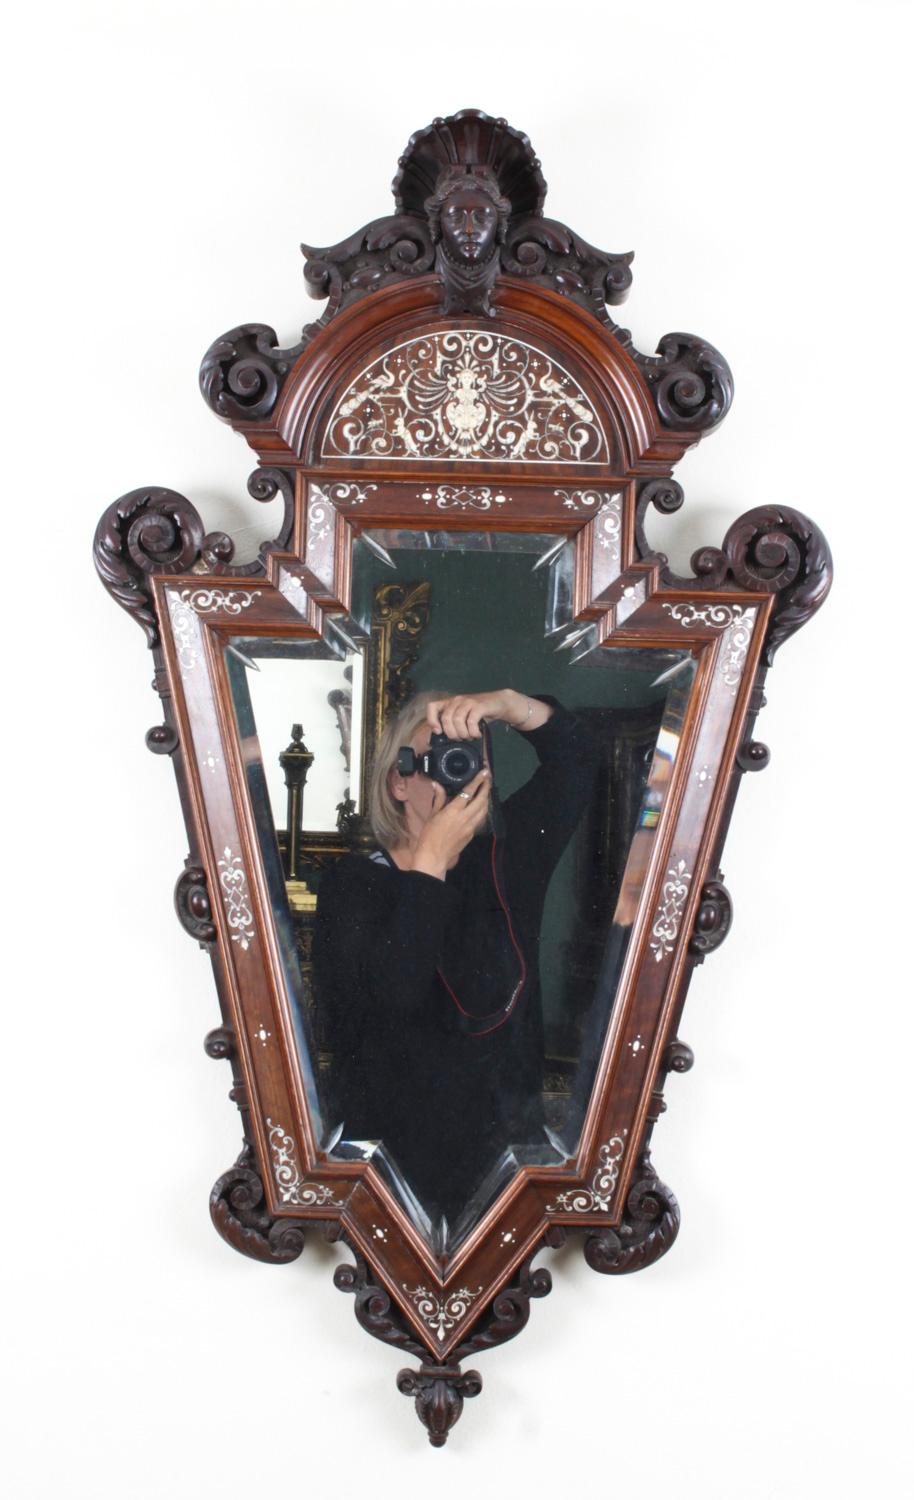 This is a beautiful antique Italian Renaissancce Revival carved walnut and bone inlaid wall mirror, dating from the late 19th century.

The mirror is set in a beautiful carved walnut frame surmounted with a portrait female mask, with 'C'